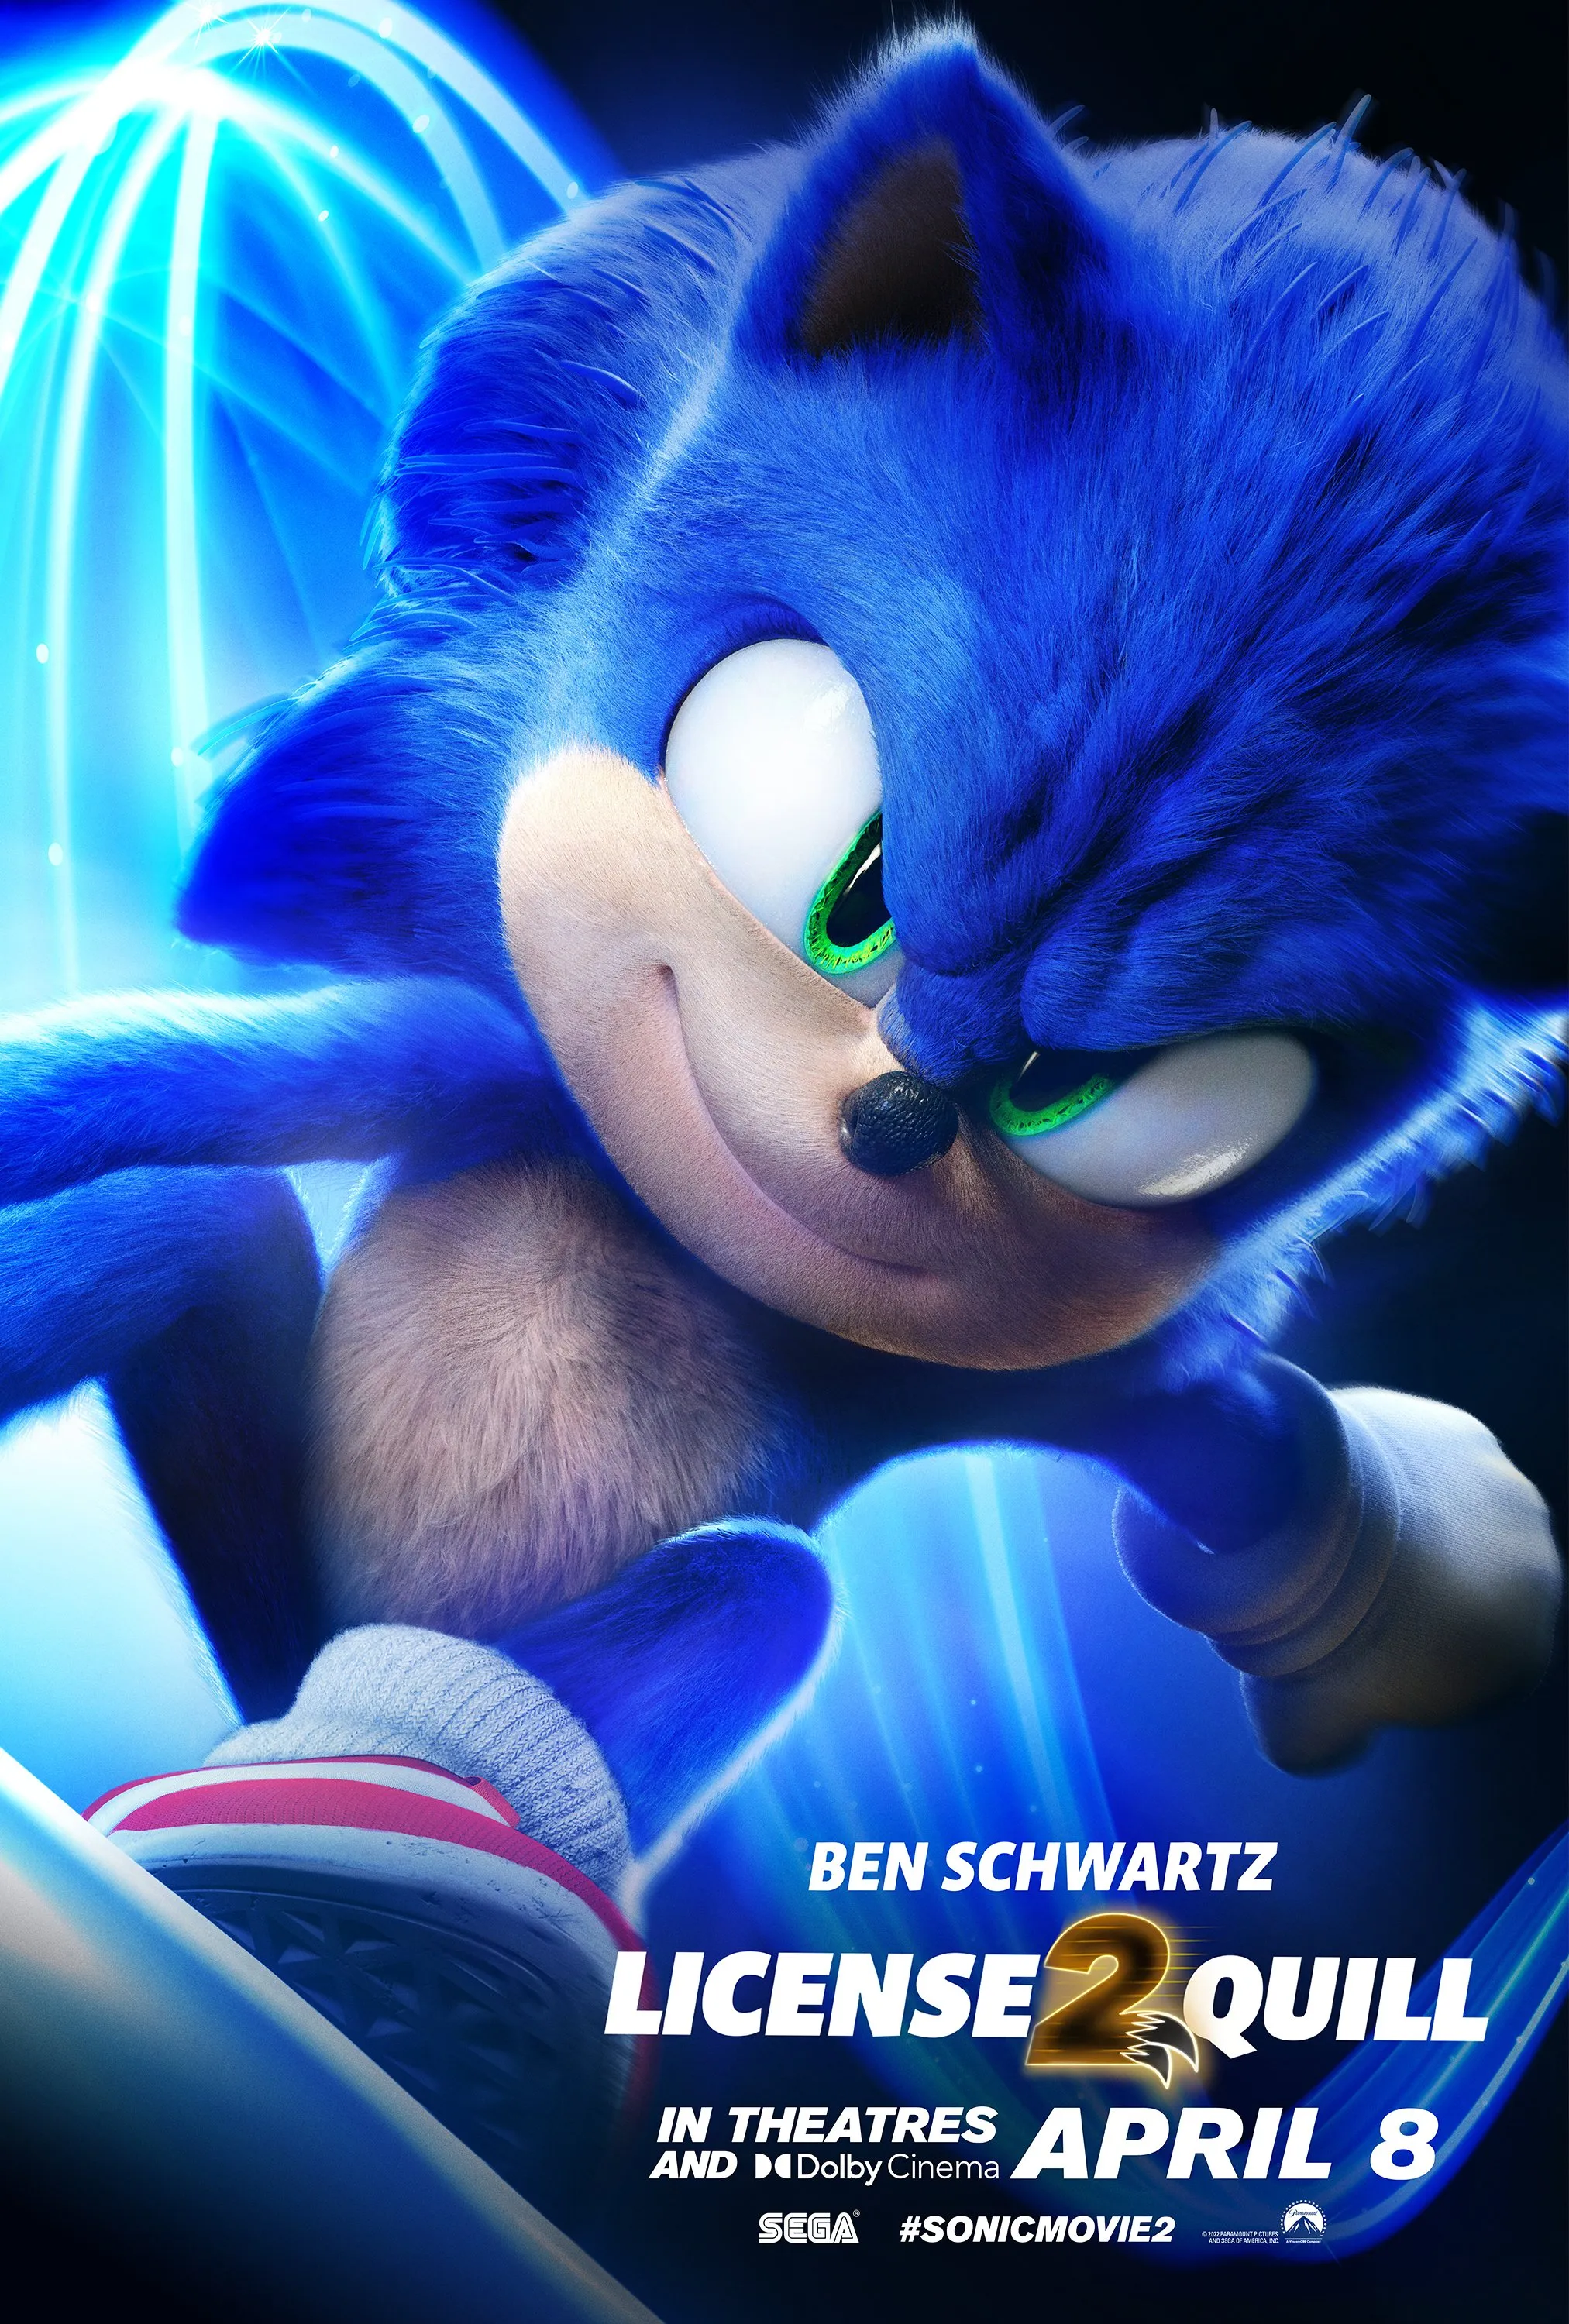 Sonic the Hedgehog 2 (2022) - Official Trailer - Paramount Pictures 